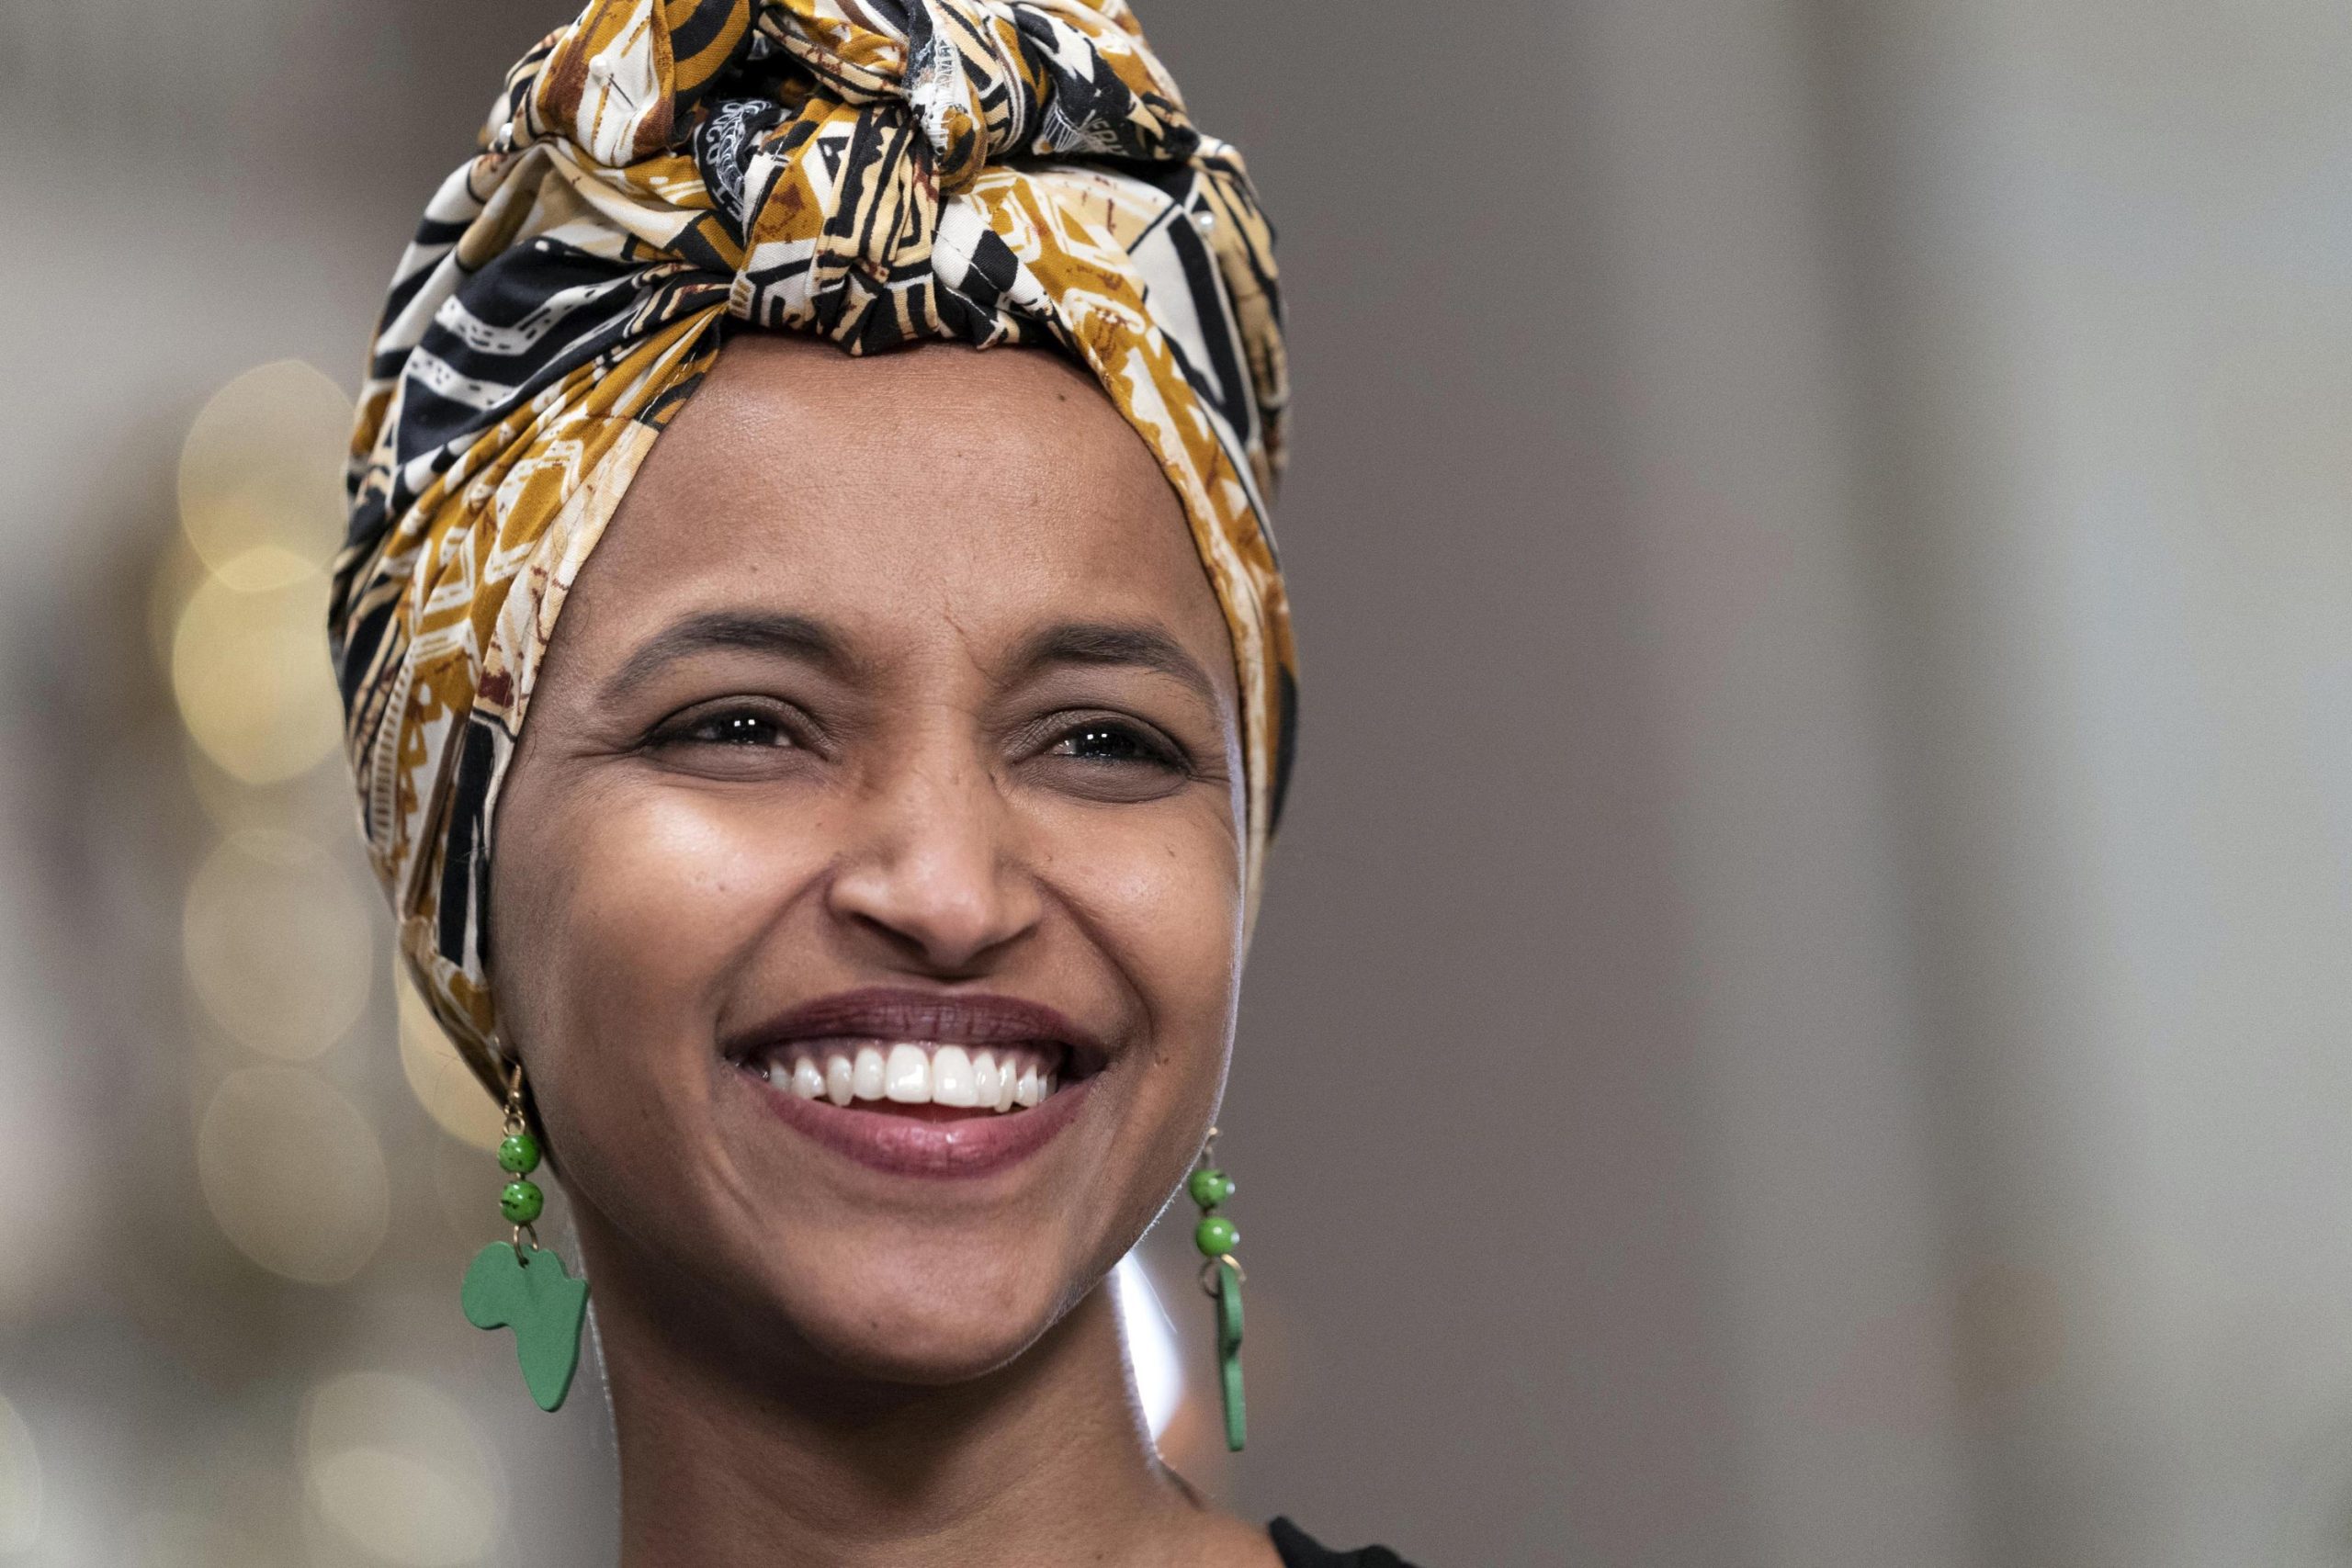 Ilhan Omar | Biography | Age | Child | Family | Career | Or | More